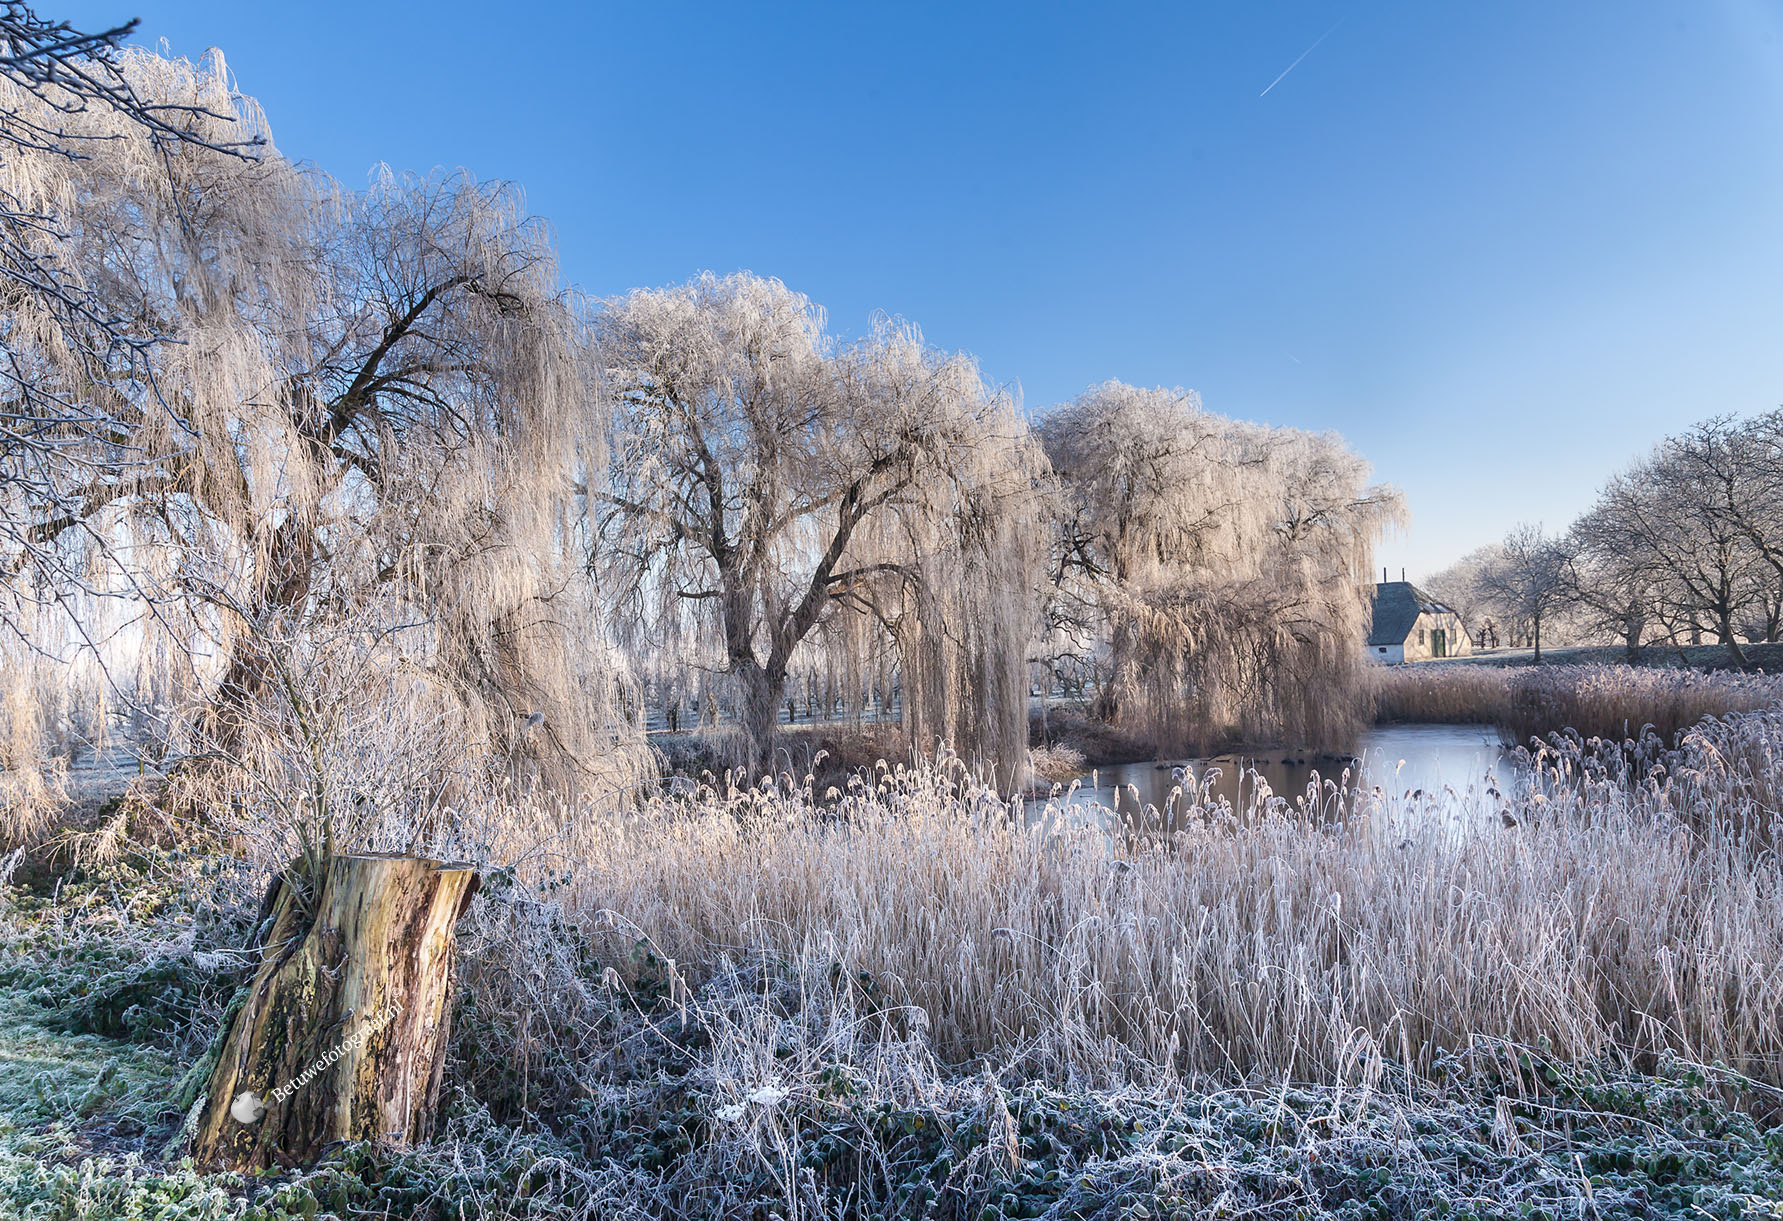 Canon EOS 5D Mark II + Sigma 24-105mm f/4 DG OS HSM | A sample photo. Frosty trees....... photography